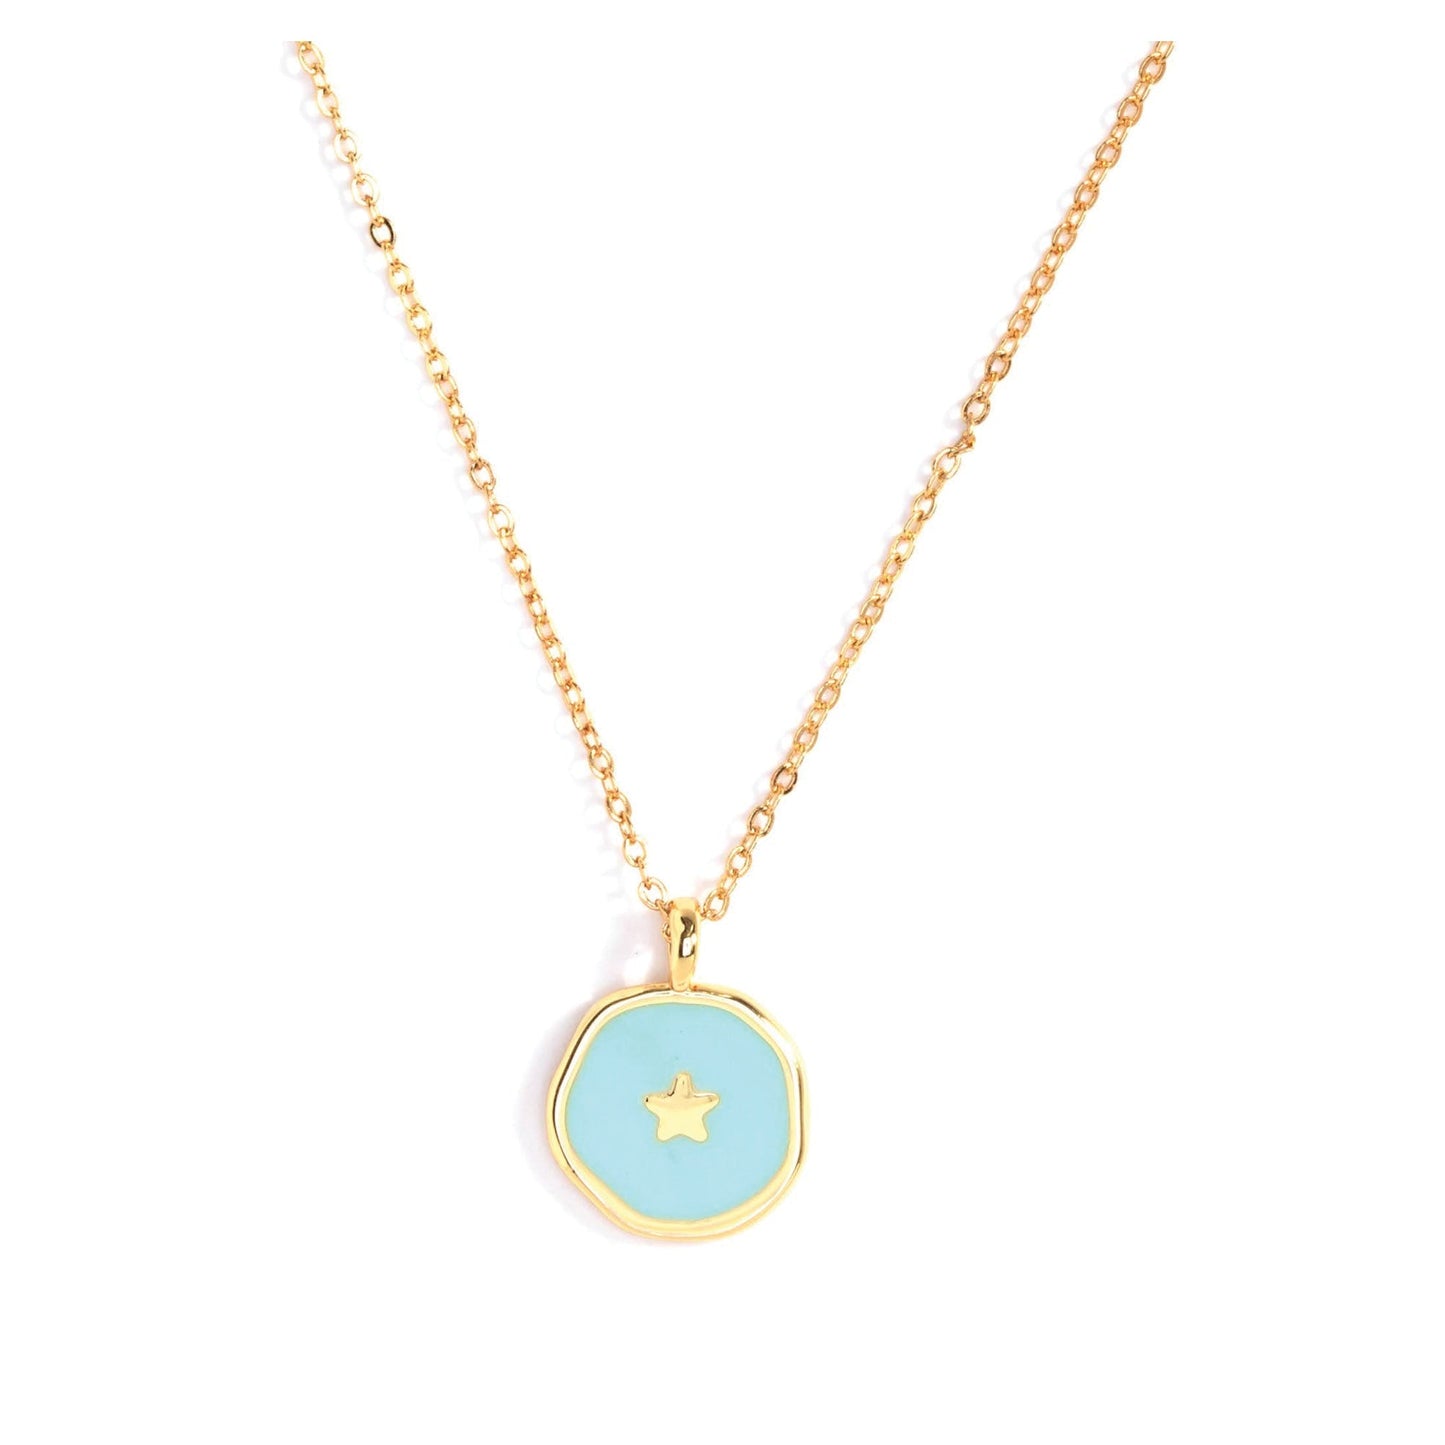 aqua pendant with gold star on gold chain on white background.